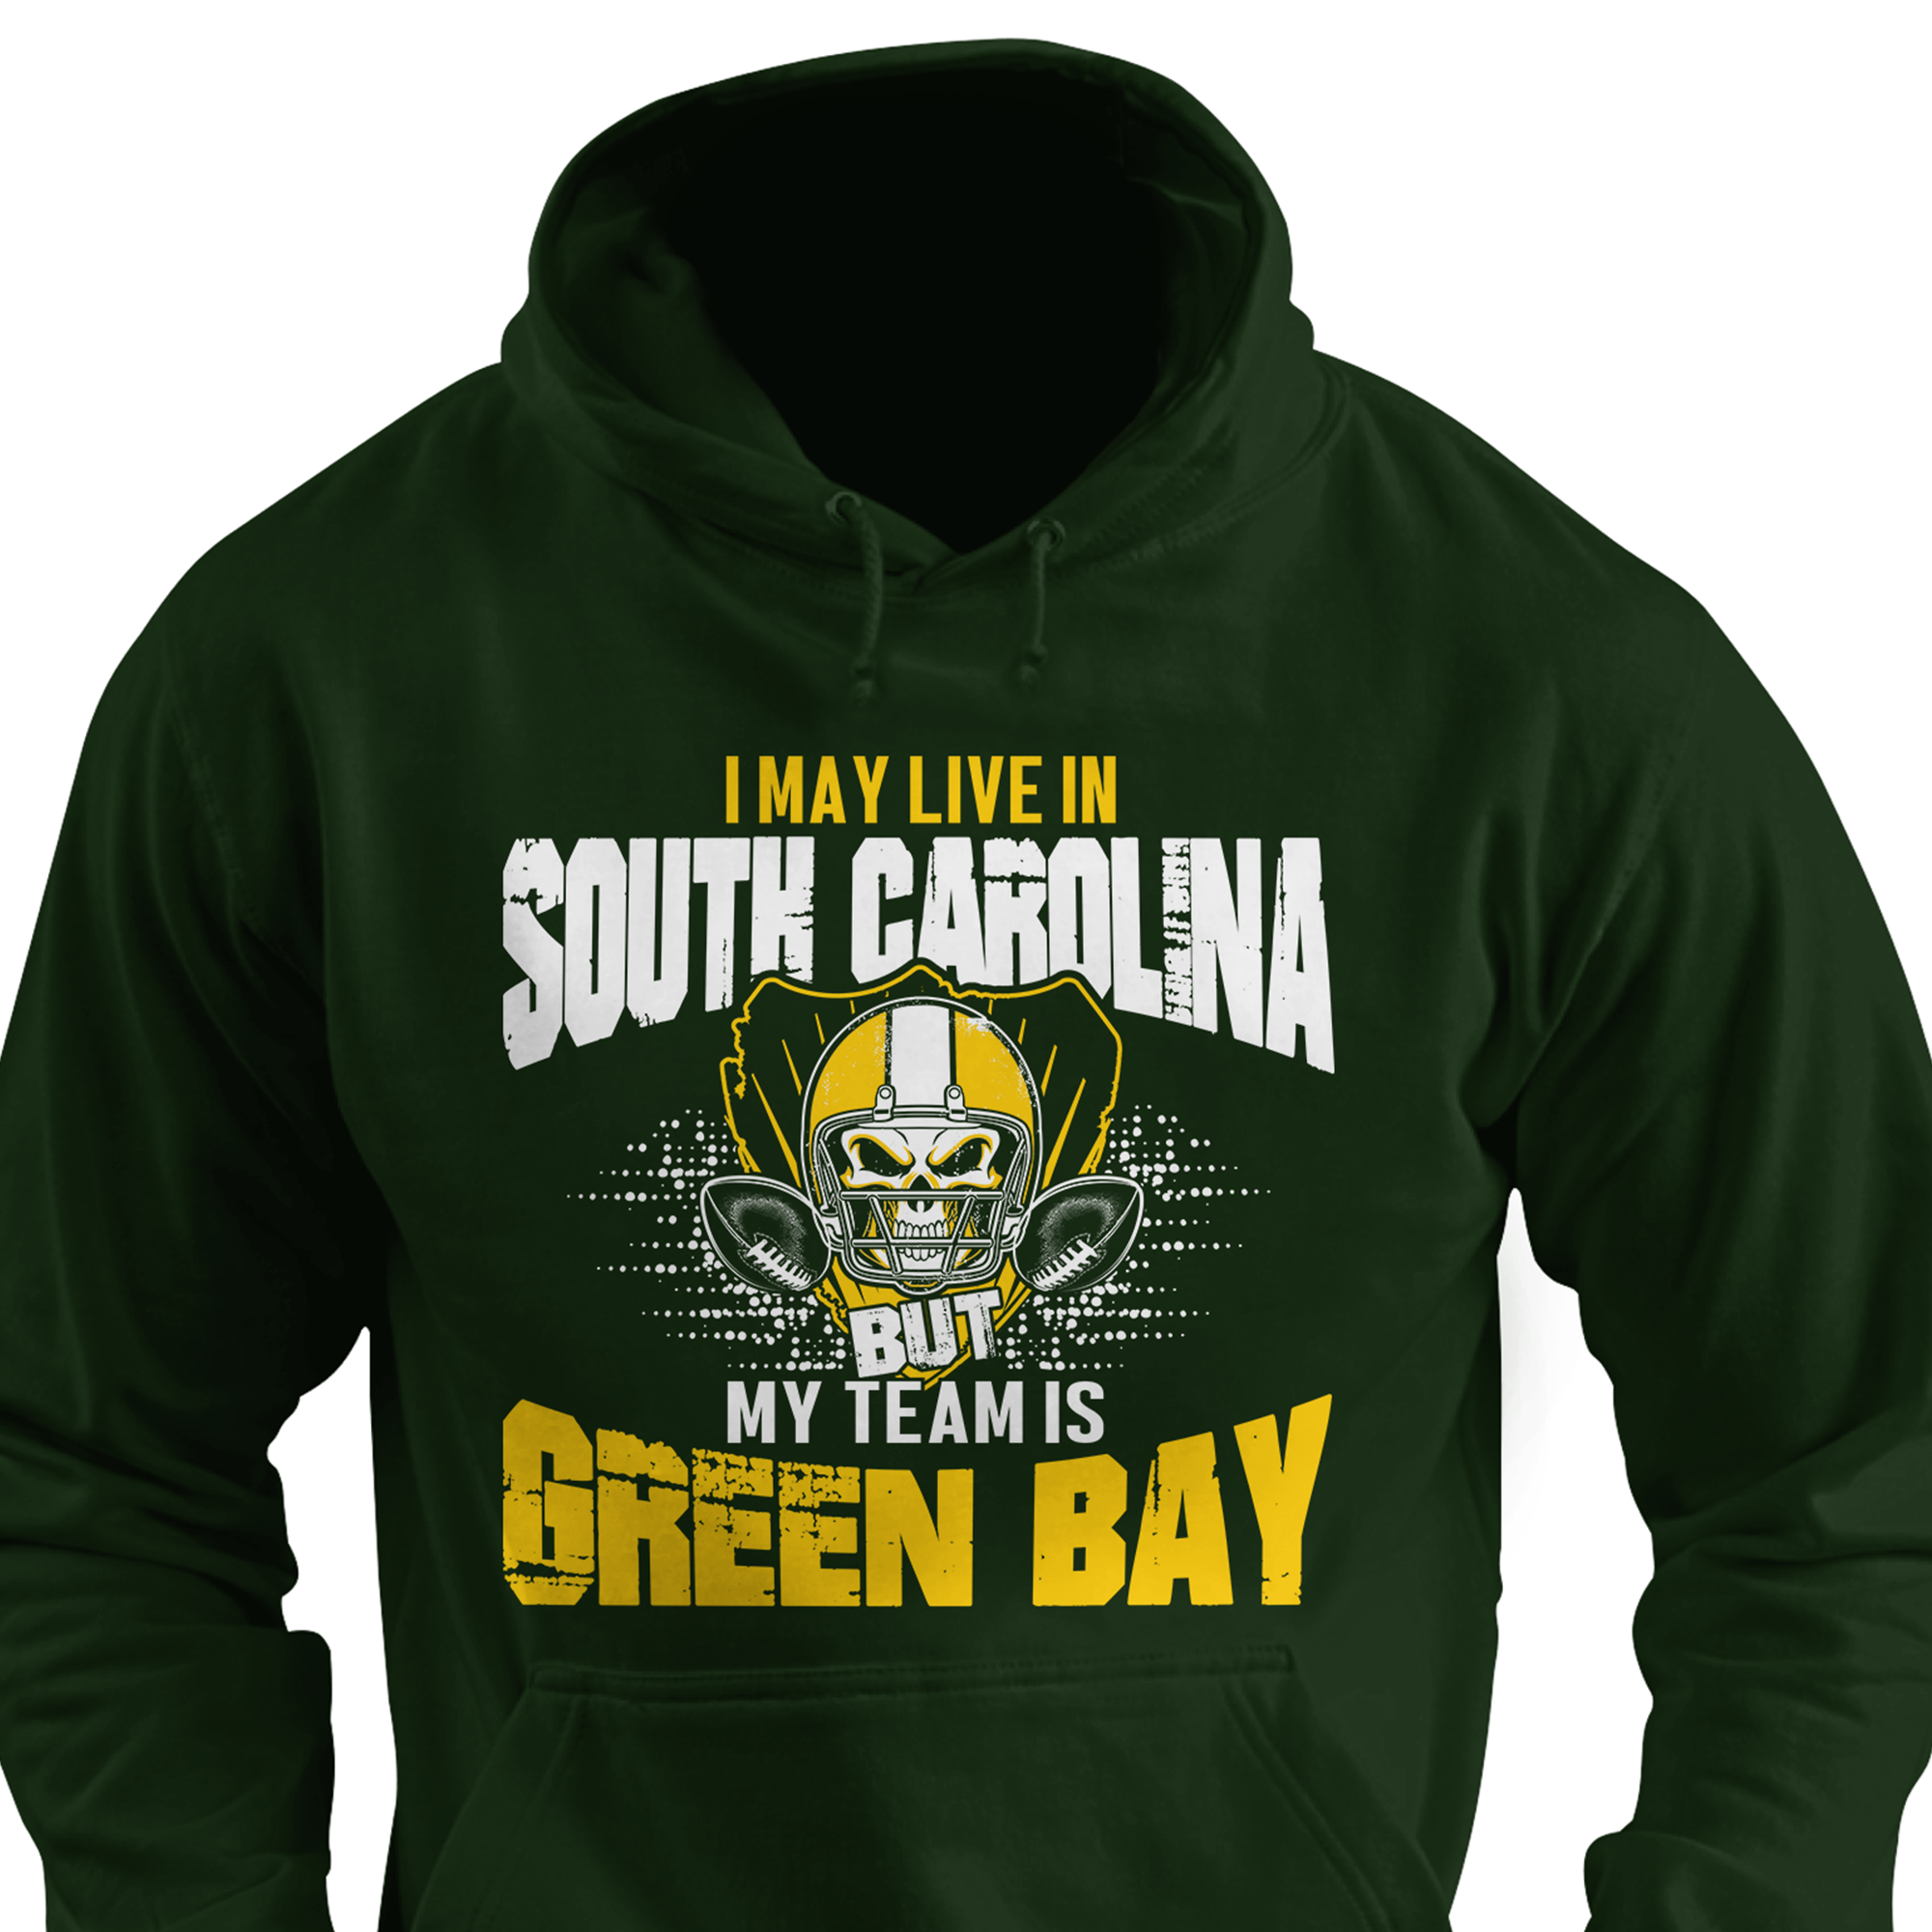 I May Live in South Carolina but My Team is Green Bay